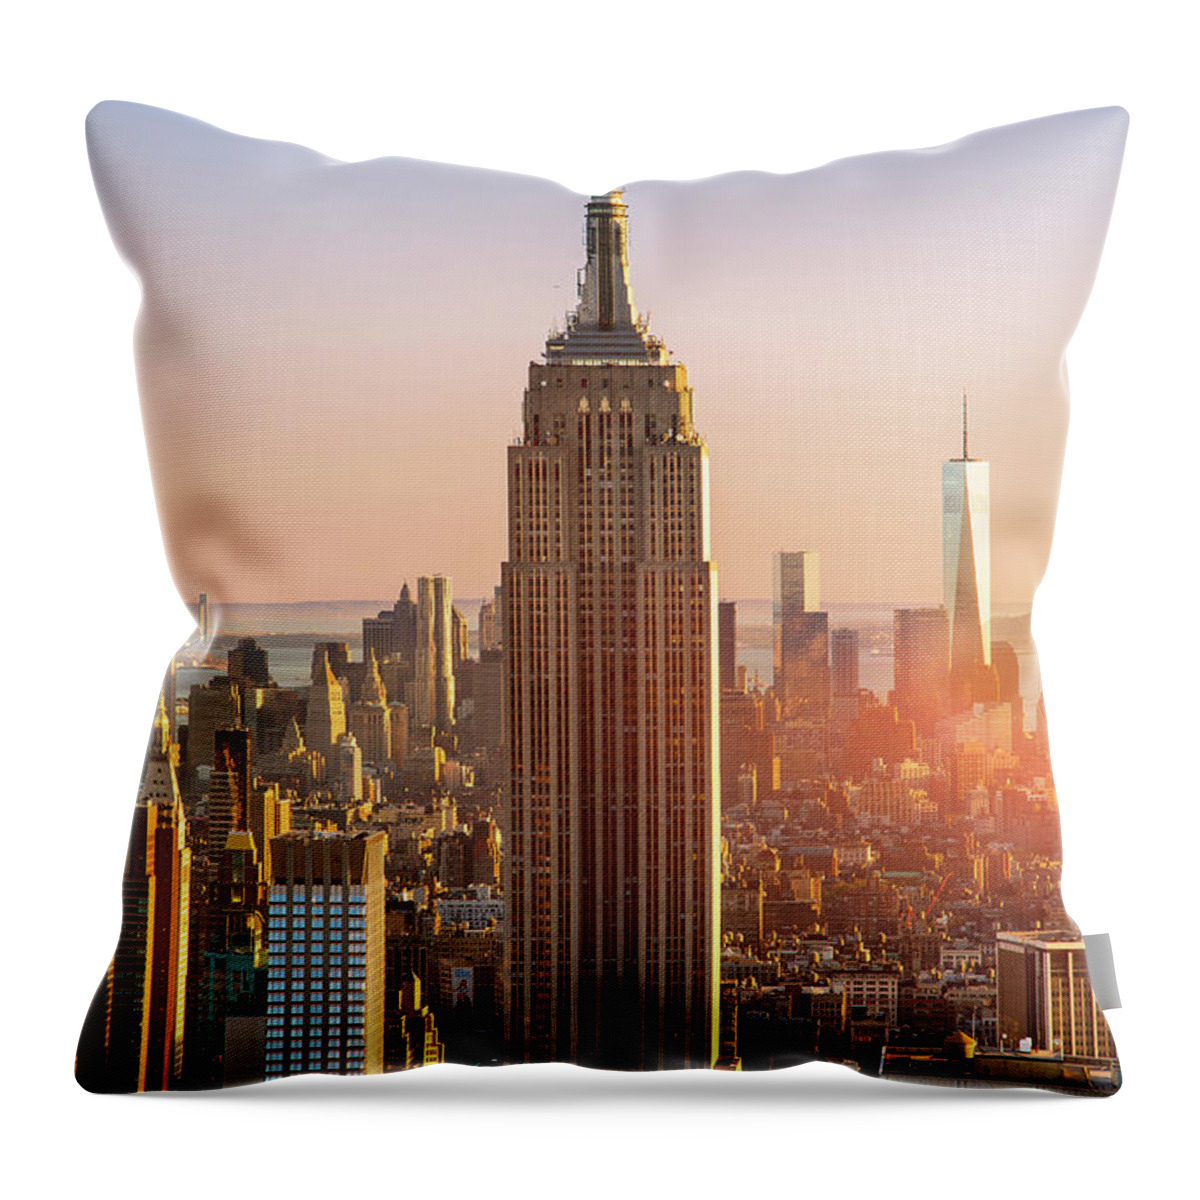 Tranquility Throw Pillow featuring the photograph Empire State Building At Sunset by Sylvain Sonnet